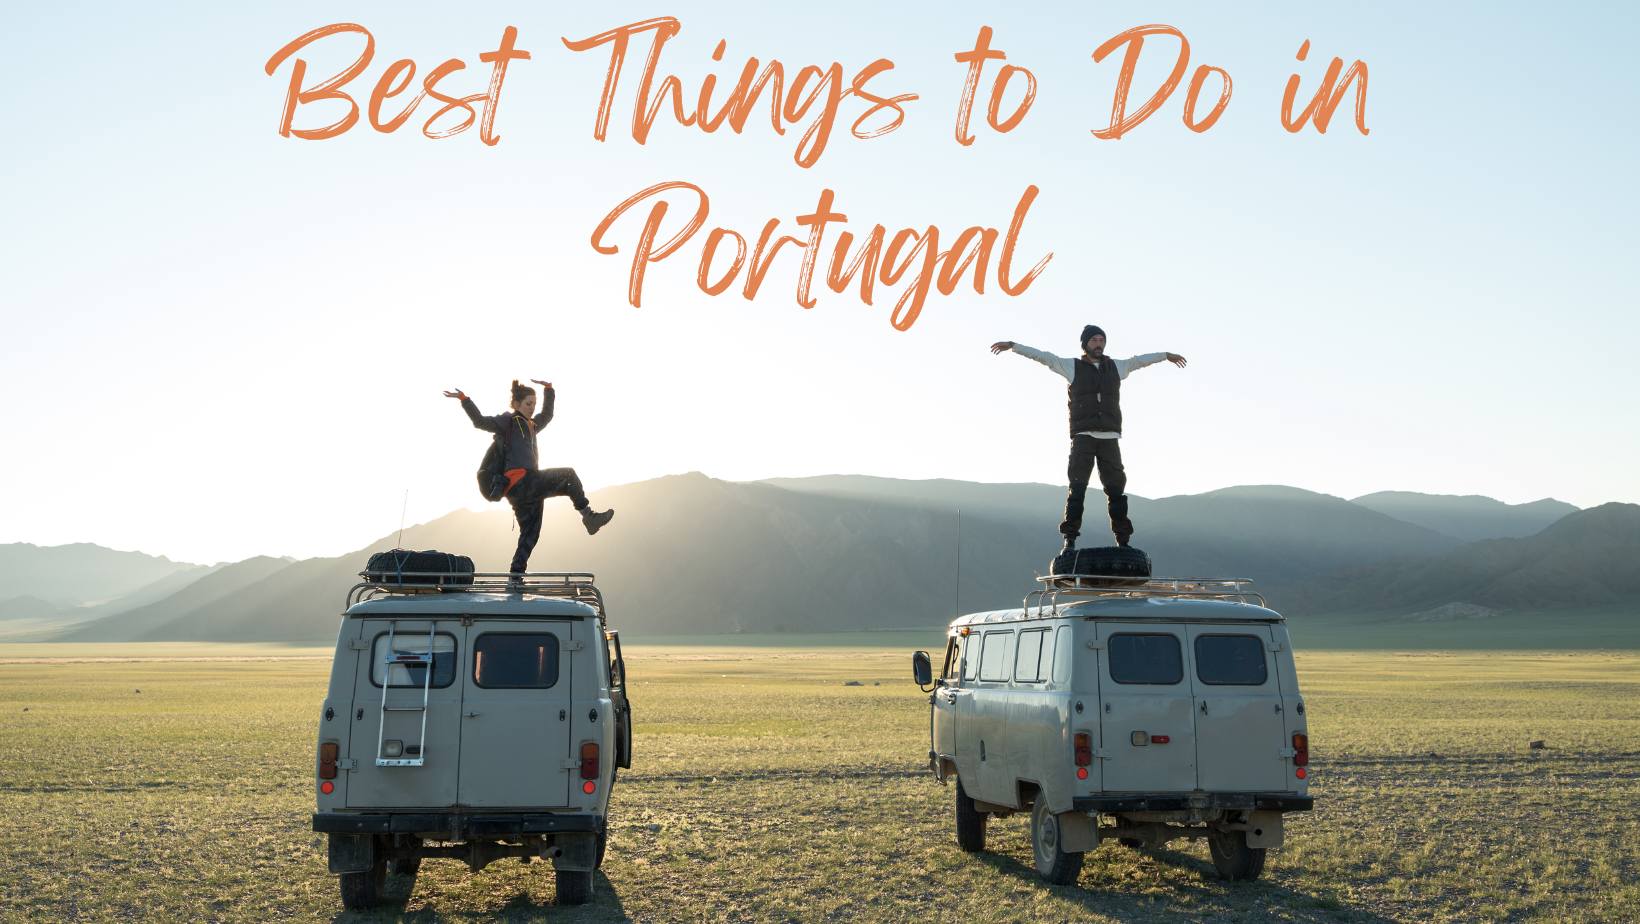 Top 25 Best Things to Do in Portugal